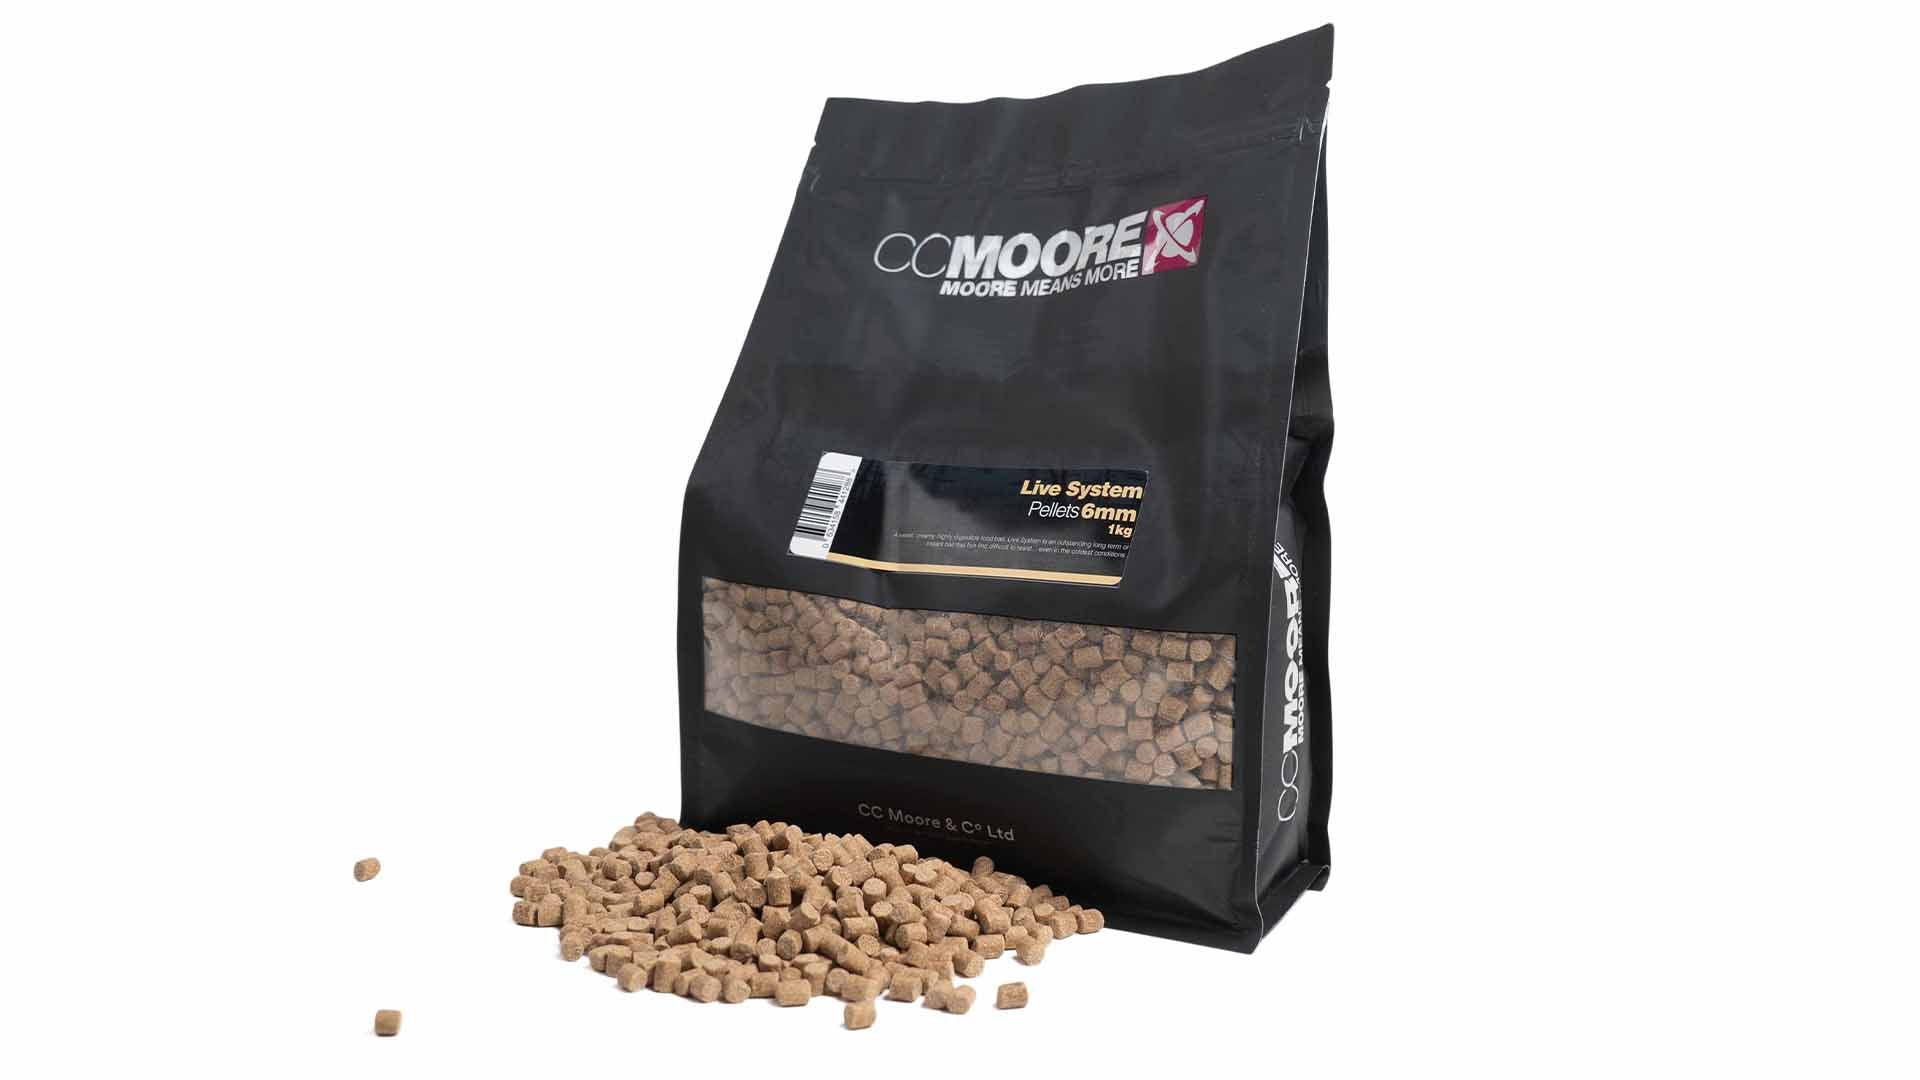 CC MOORE CC MOORE Live System Pellets  - Parkfield Angling Centre